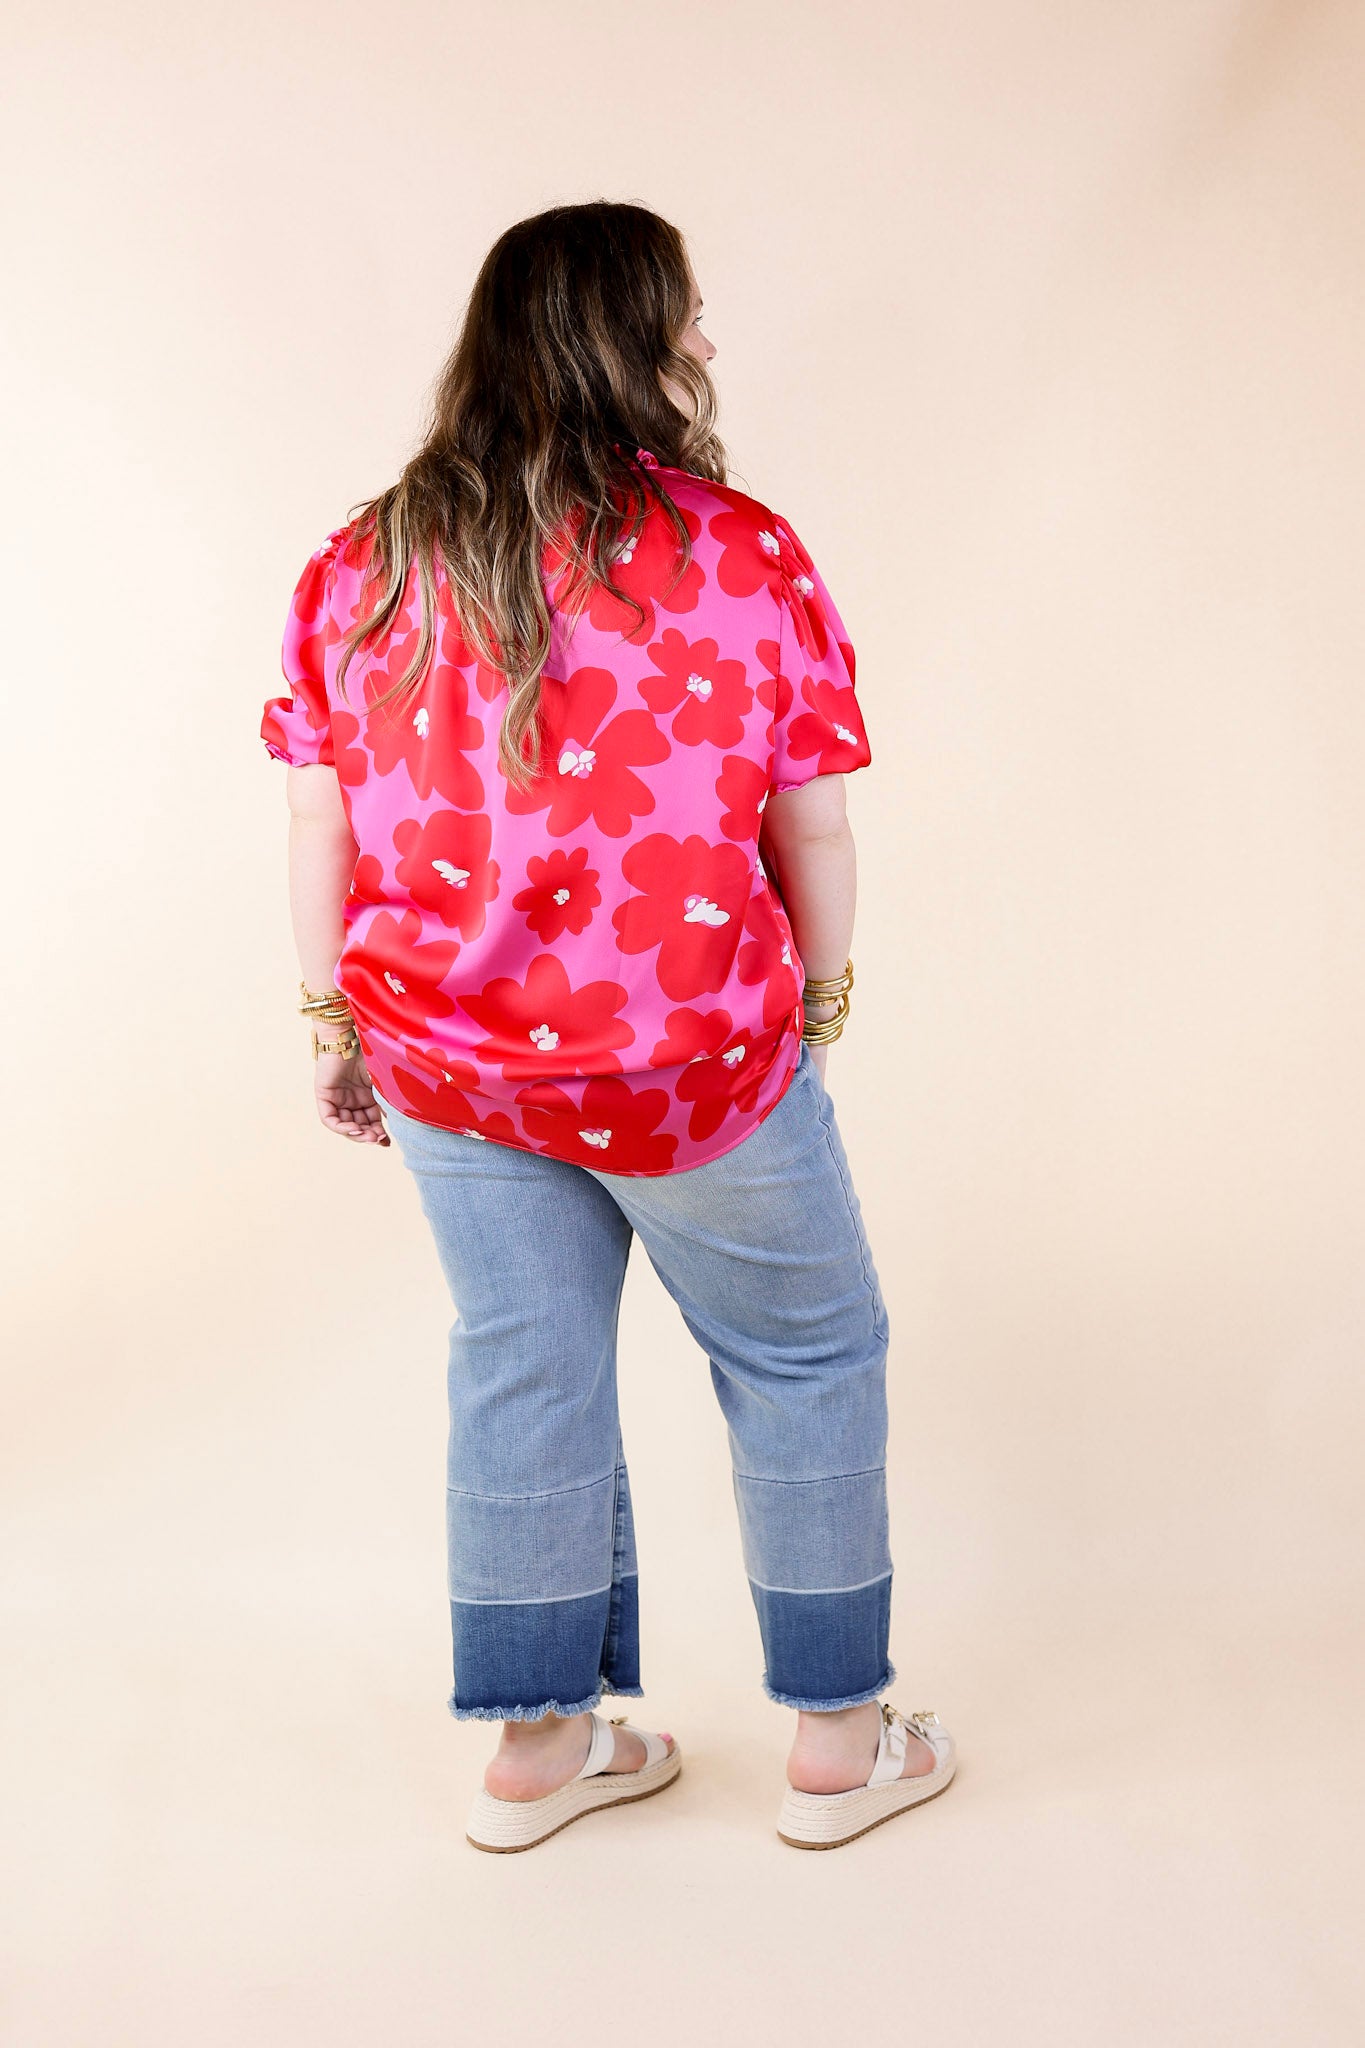 Divine Design Floral Blouse With Puffed Sleeve and Ruffle Neckline in Pink - Giddy Up Glamour Boutique